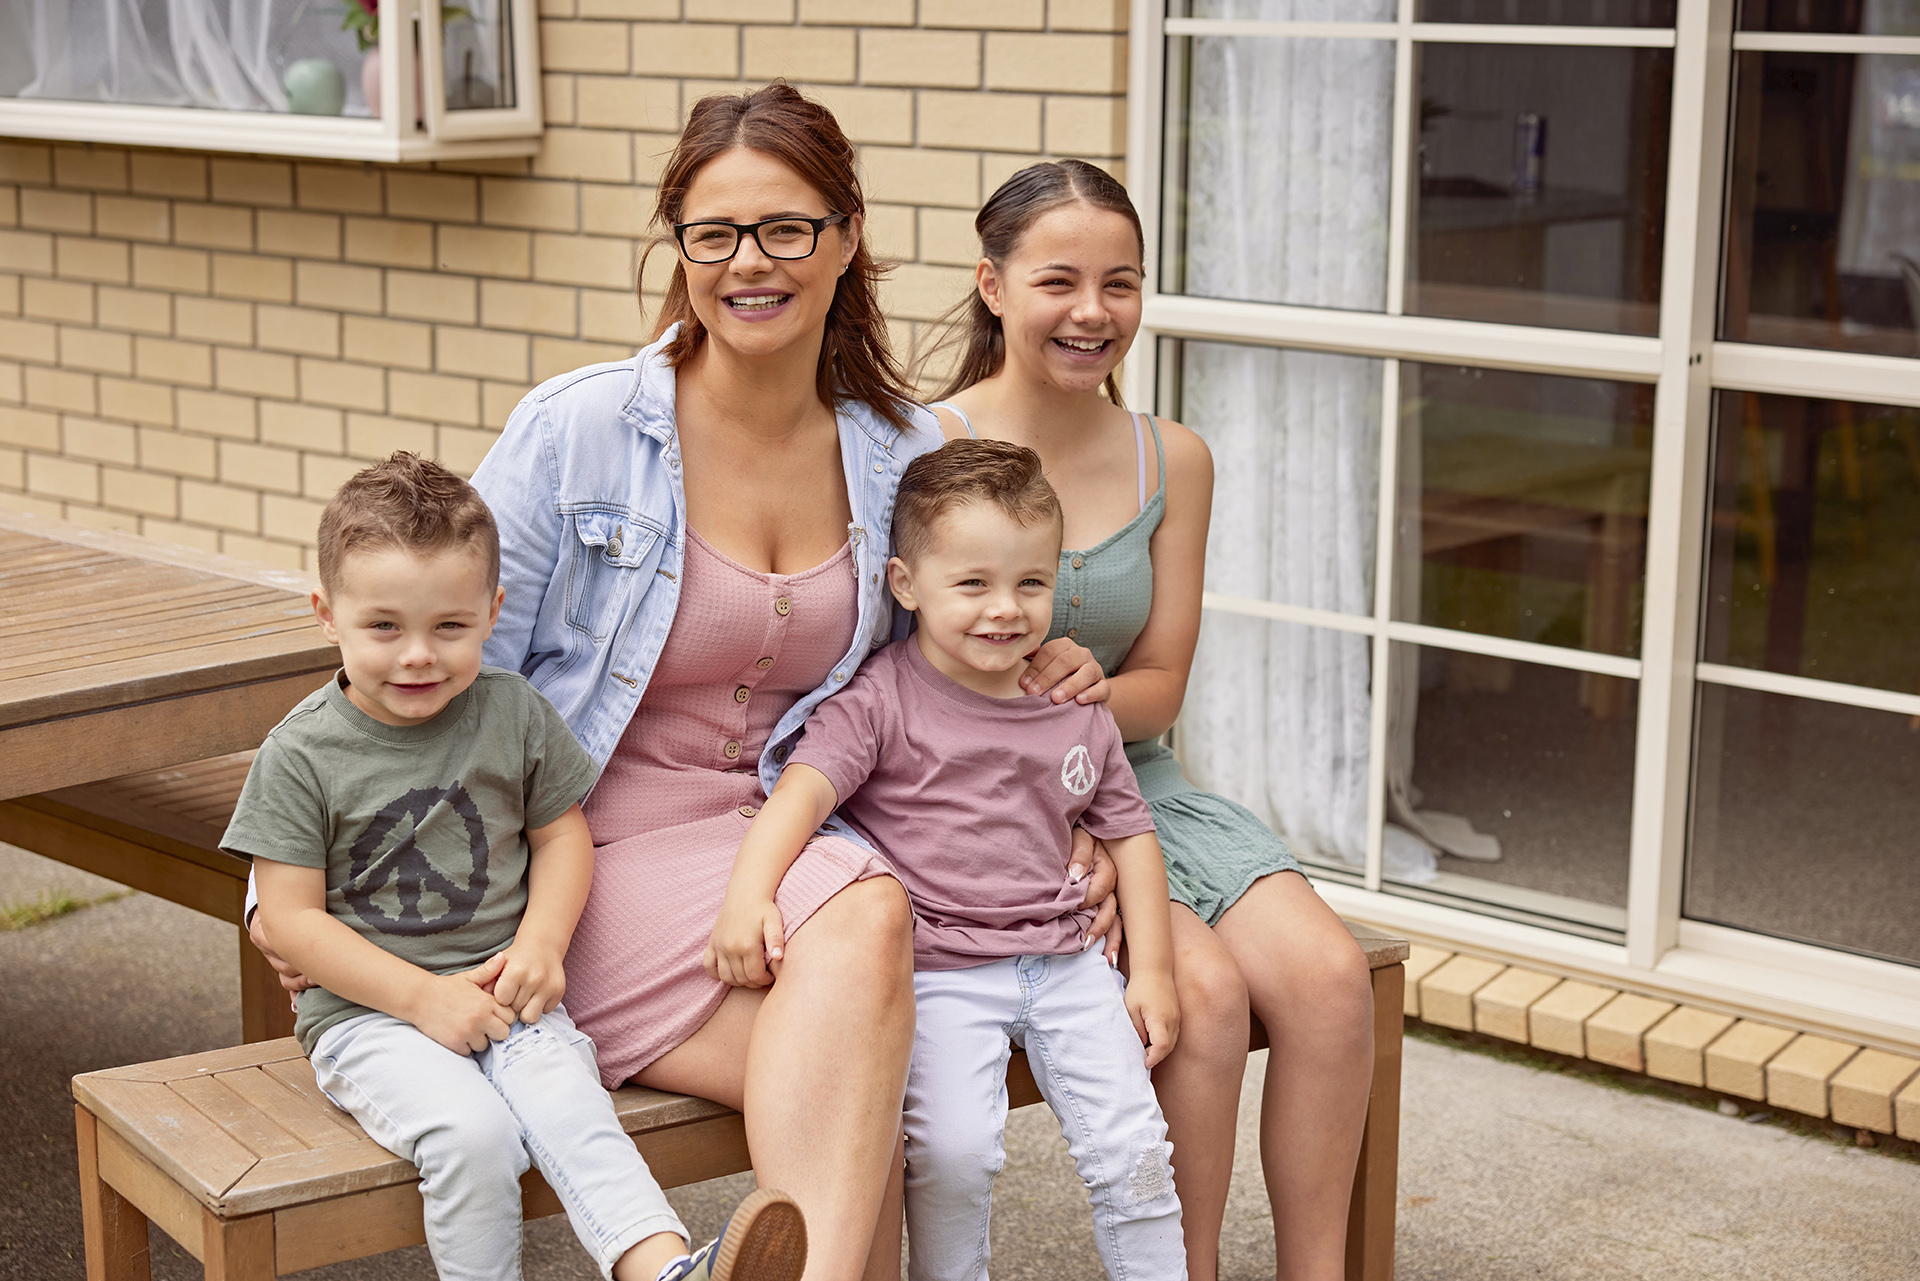 This Kiwi mum had a hysterectomy at 30 for her kids